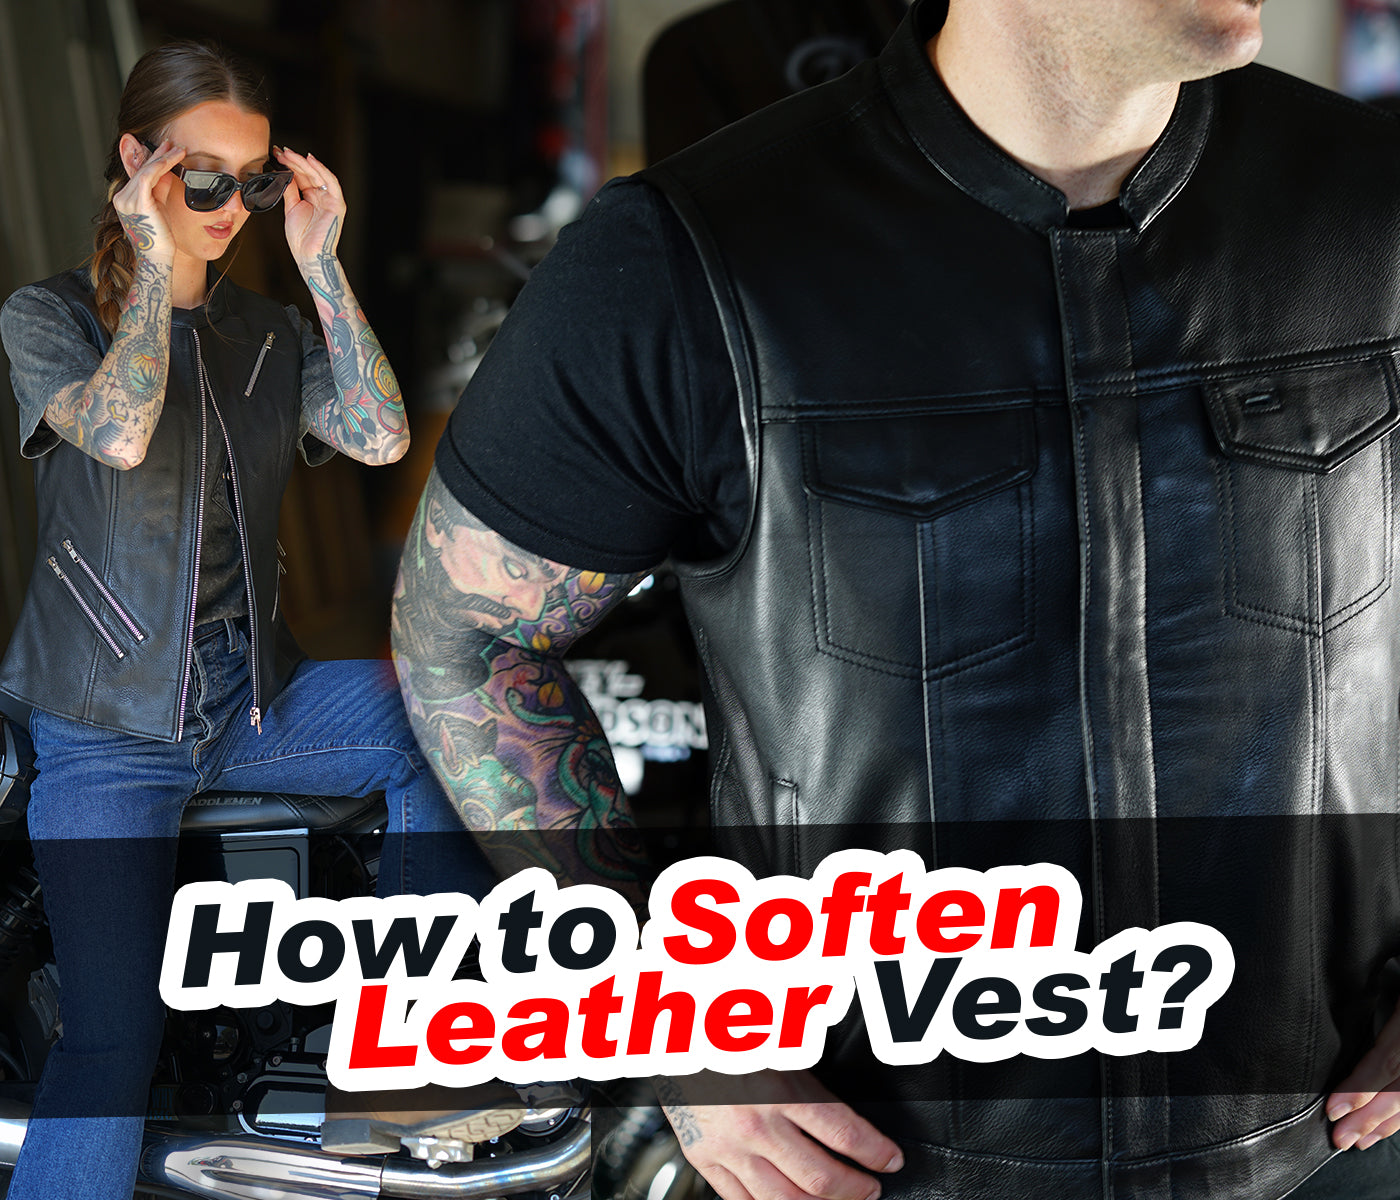 How to Soften Leather Vest?